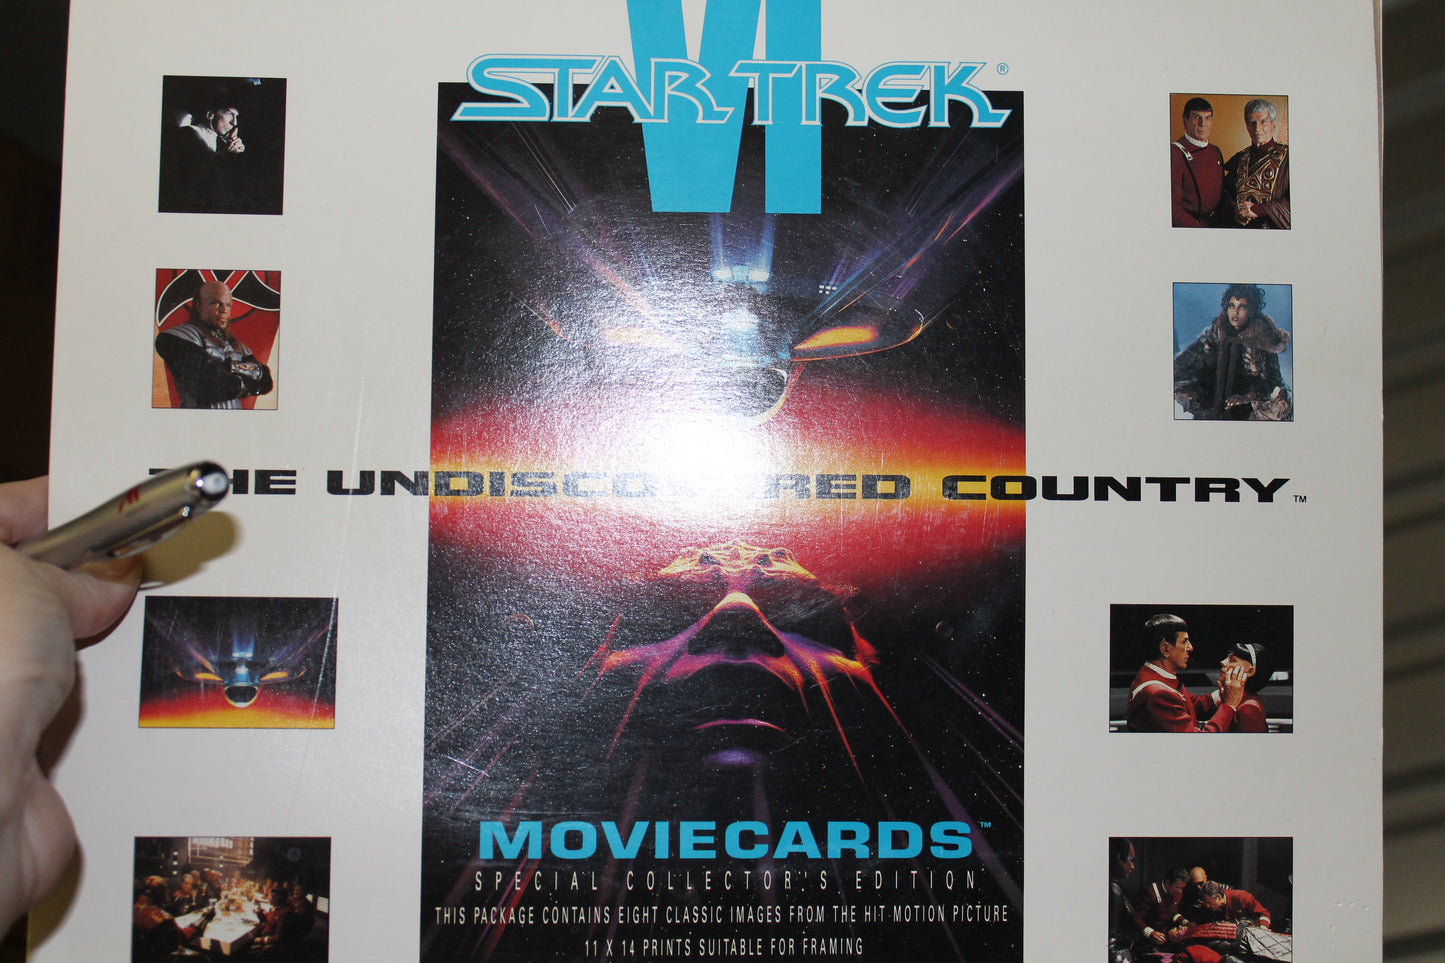 Star Trek 6 The Undiscovered Country Movie Cards